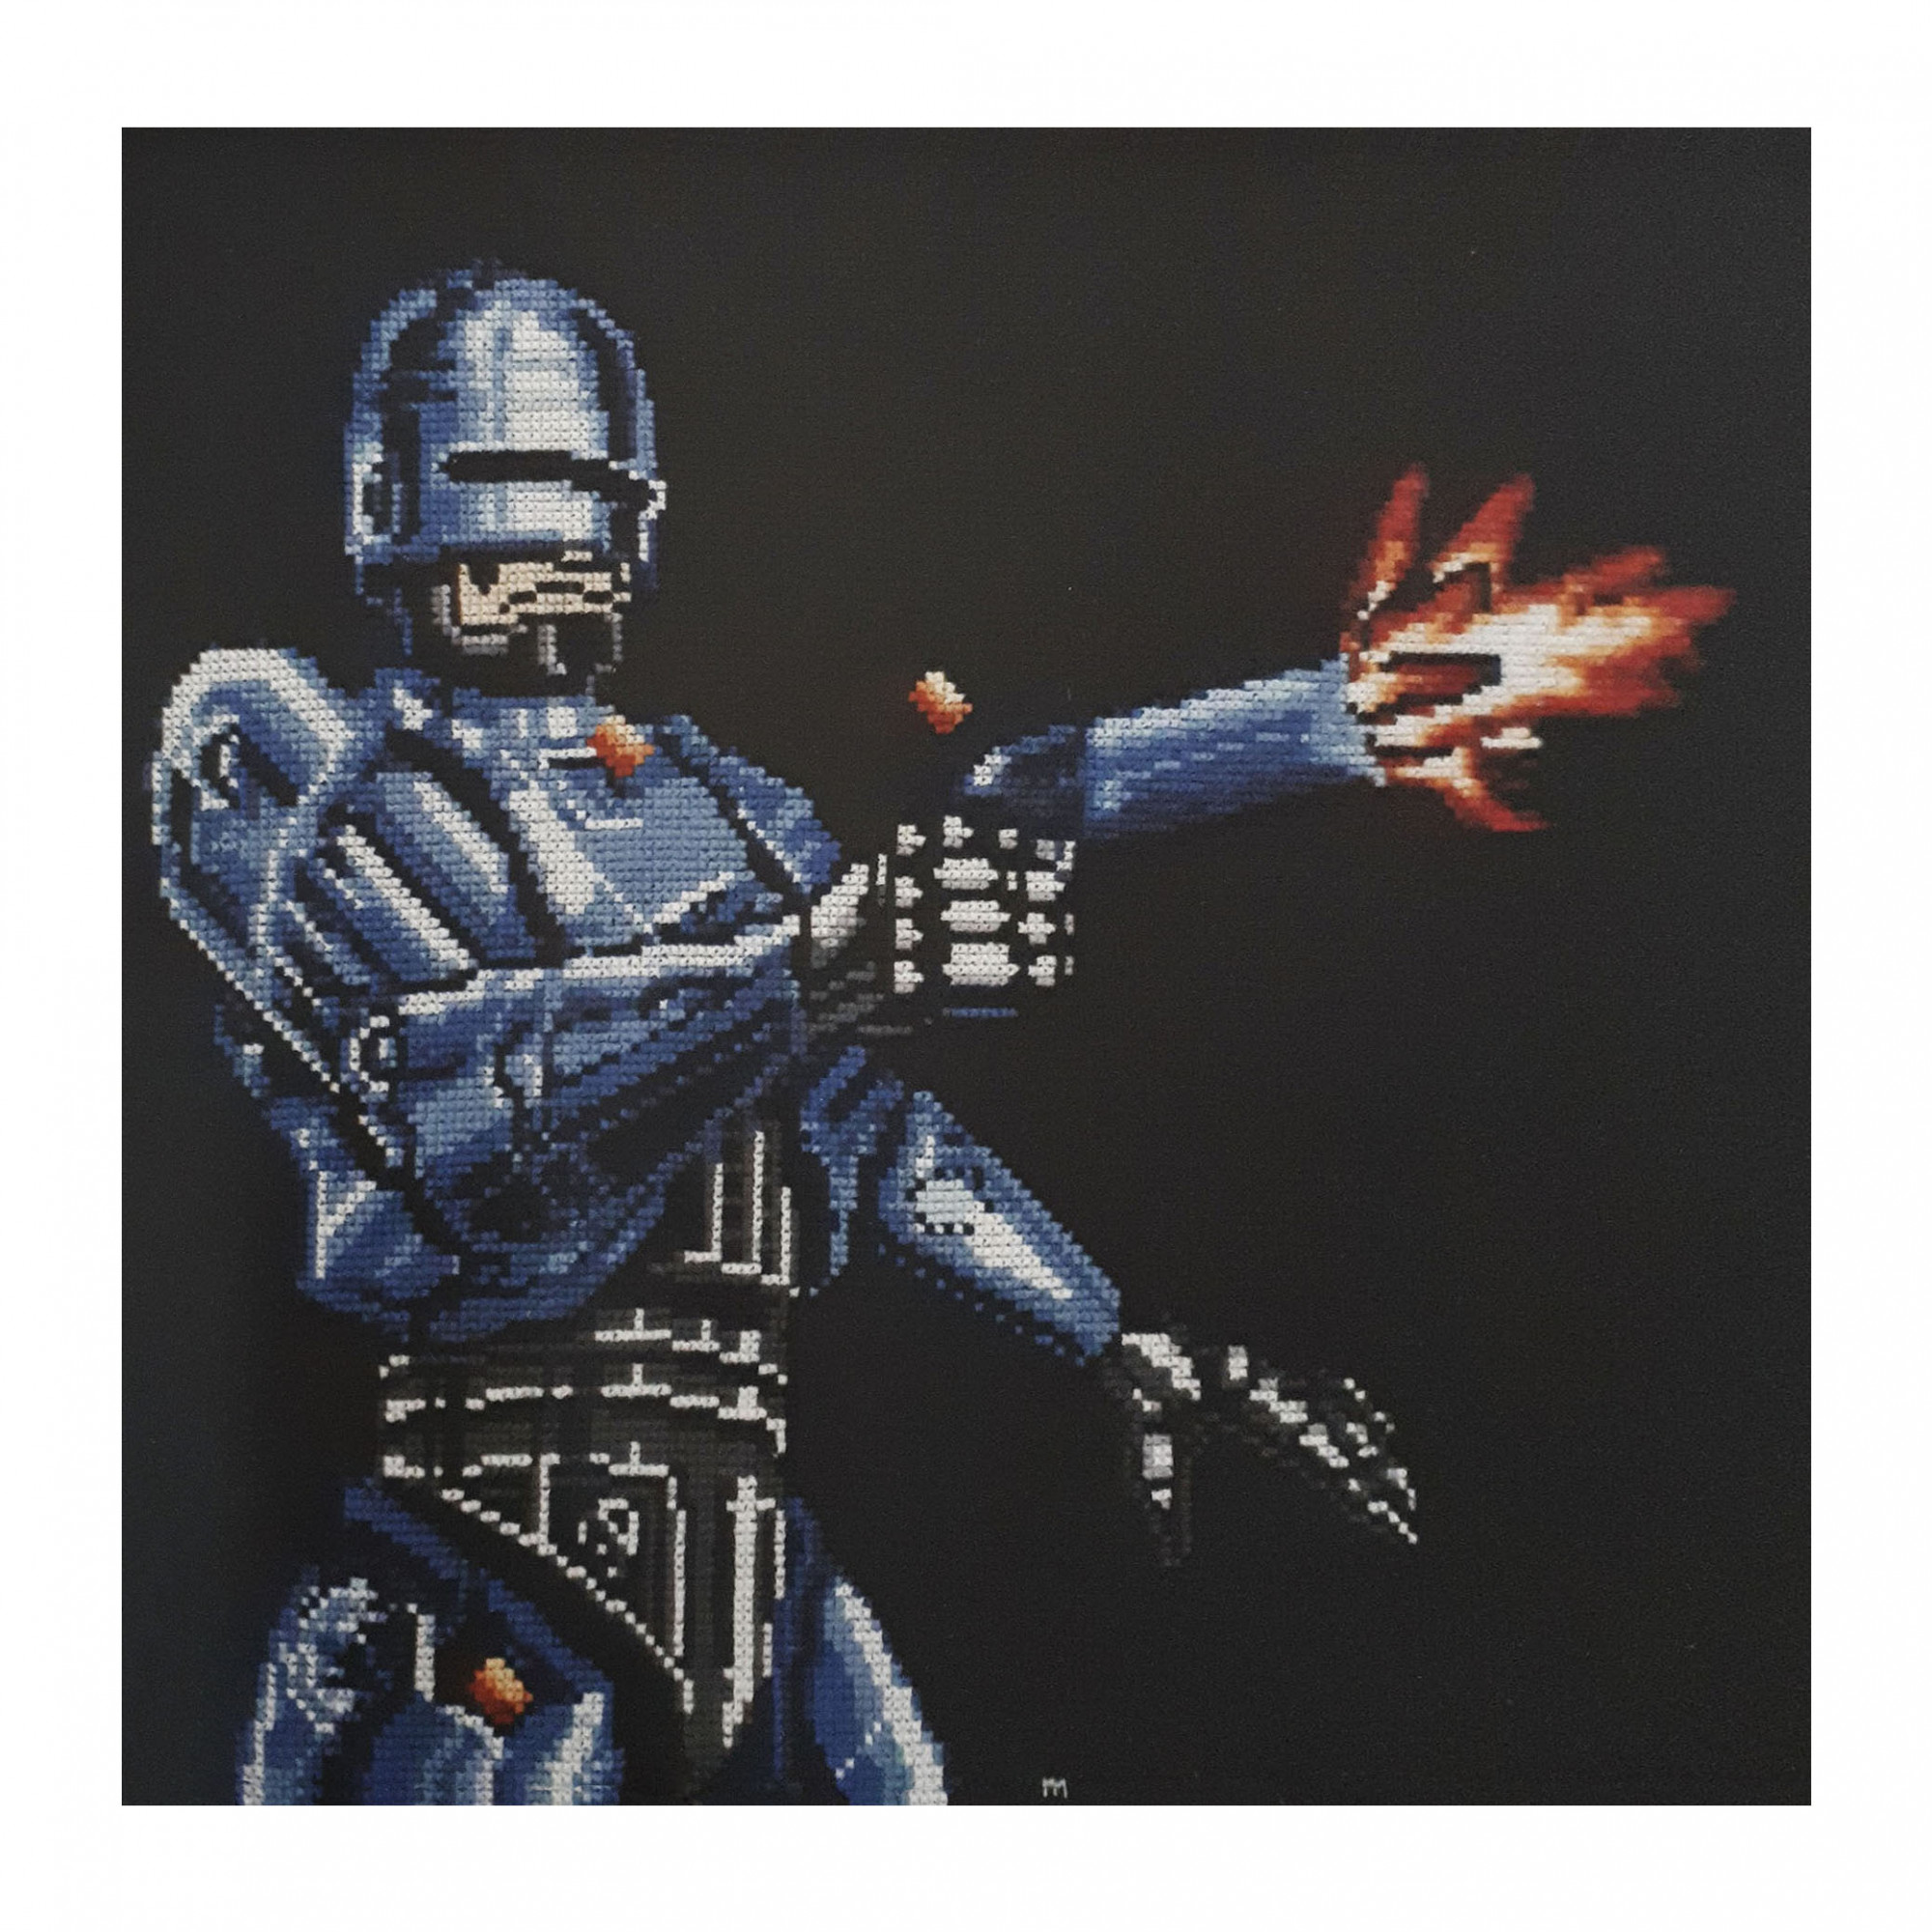  / Cross-stitch embroidery from *Robocop 2* video game, Ocean Software, on NES. Art by artist Marine Beaufils.